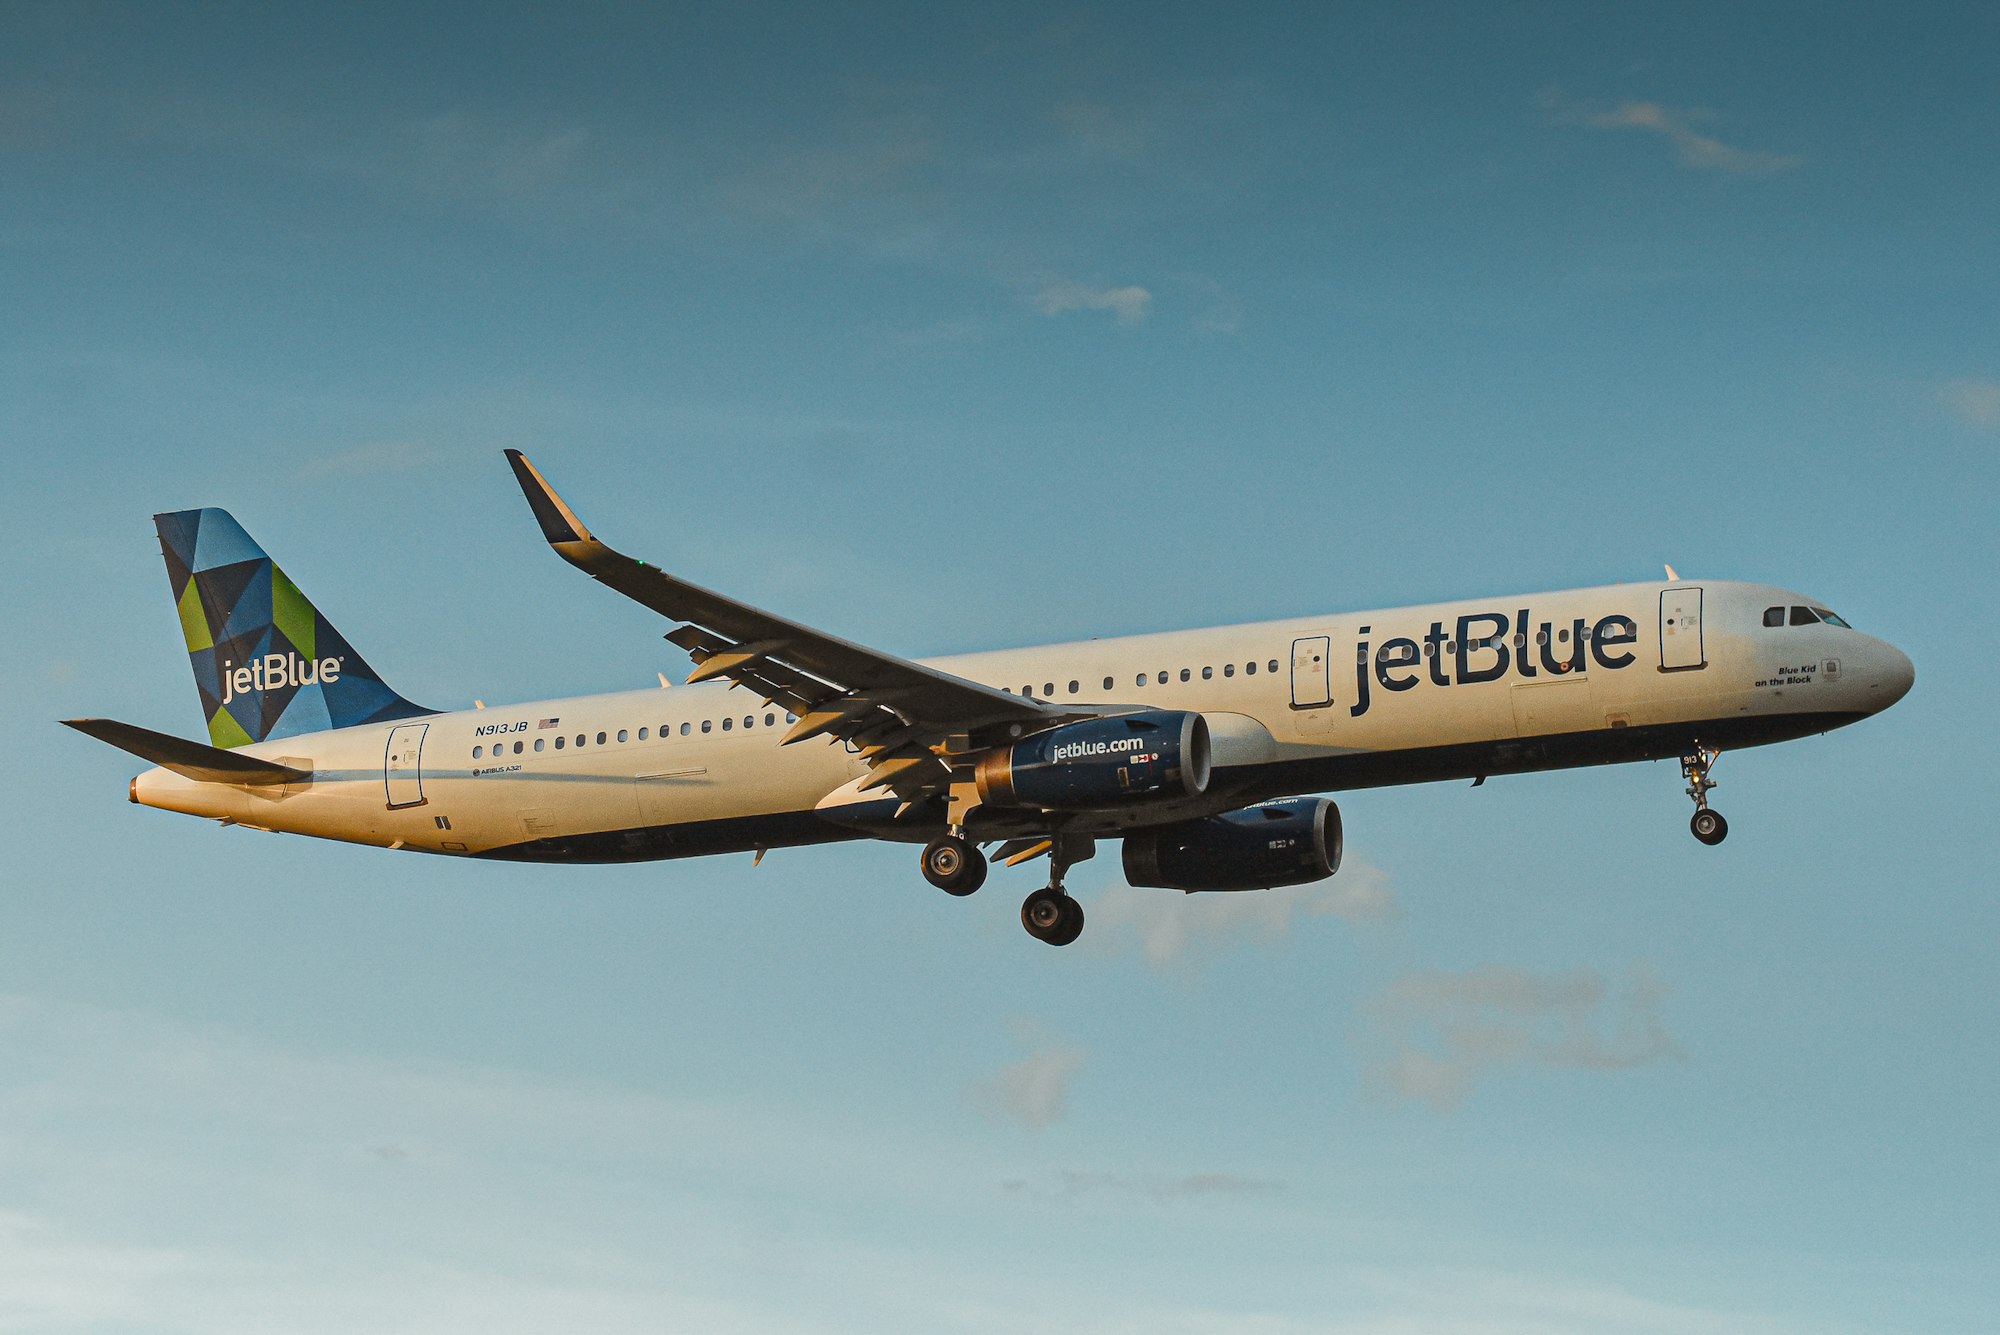 JetBlue Soars to New Heights with Best Economy Class Award by The Points Guy